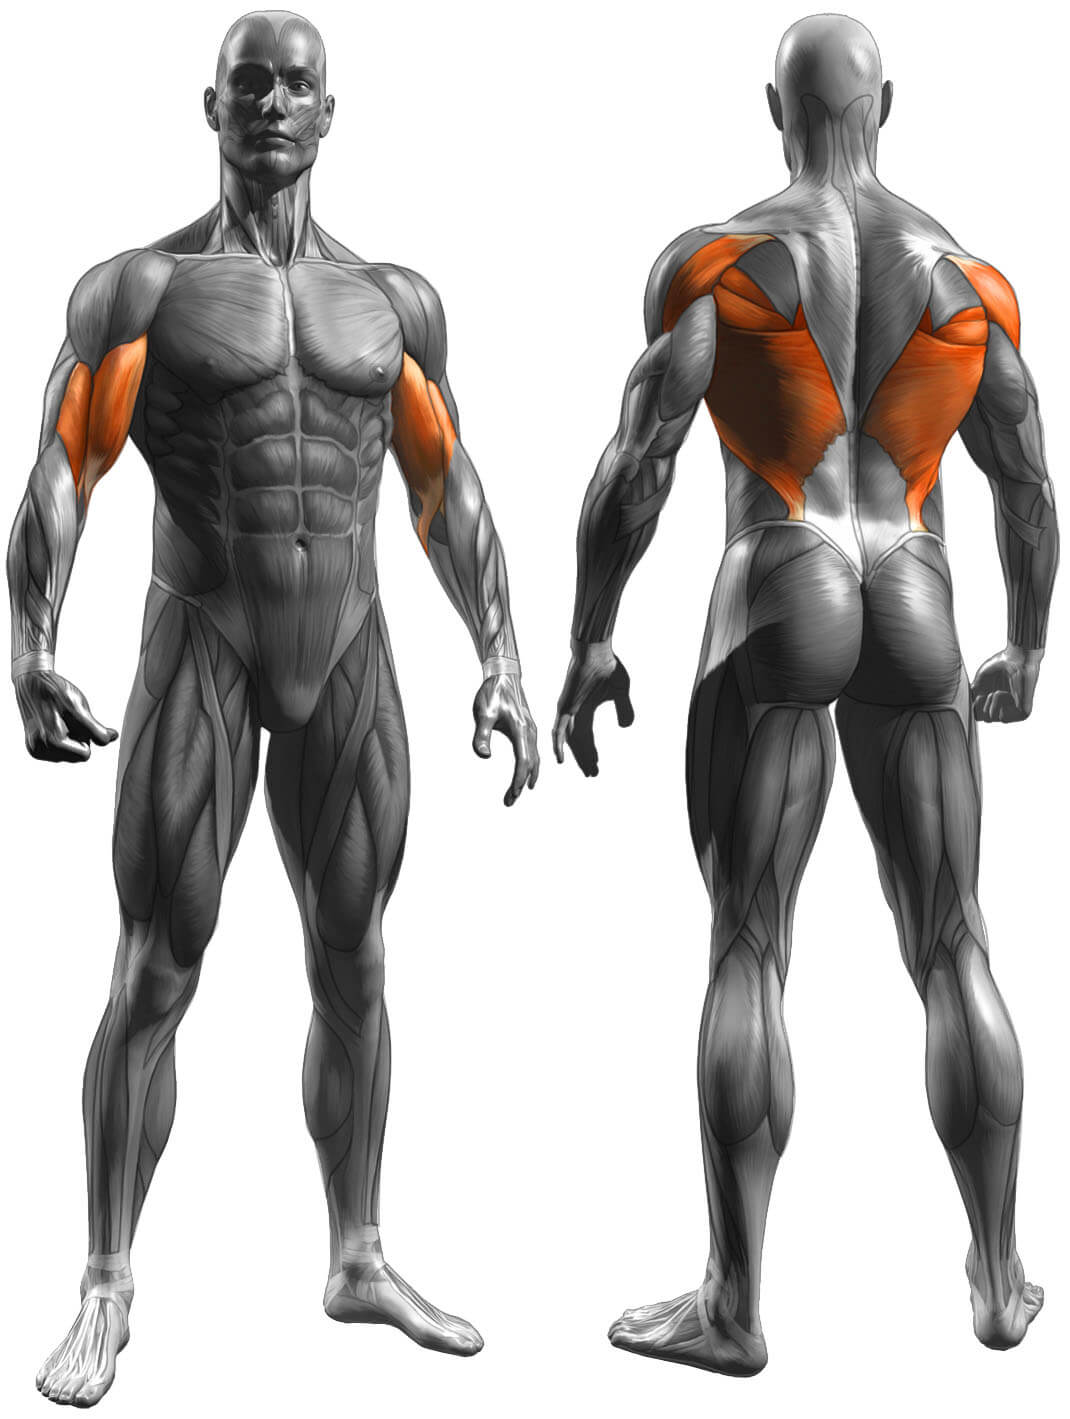 Which Muscles Are Used During Pull Ups?